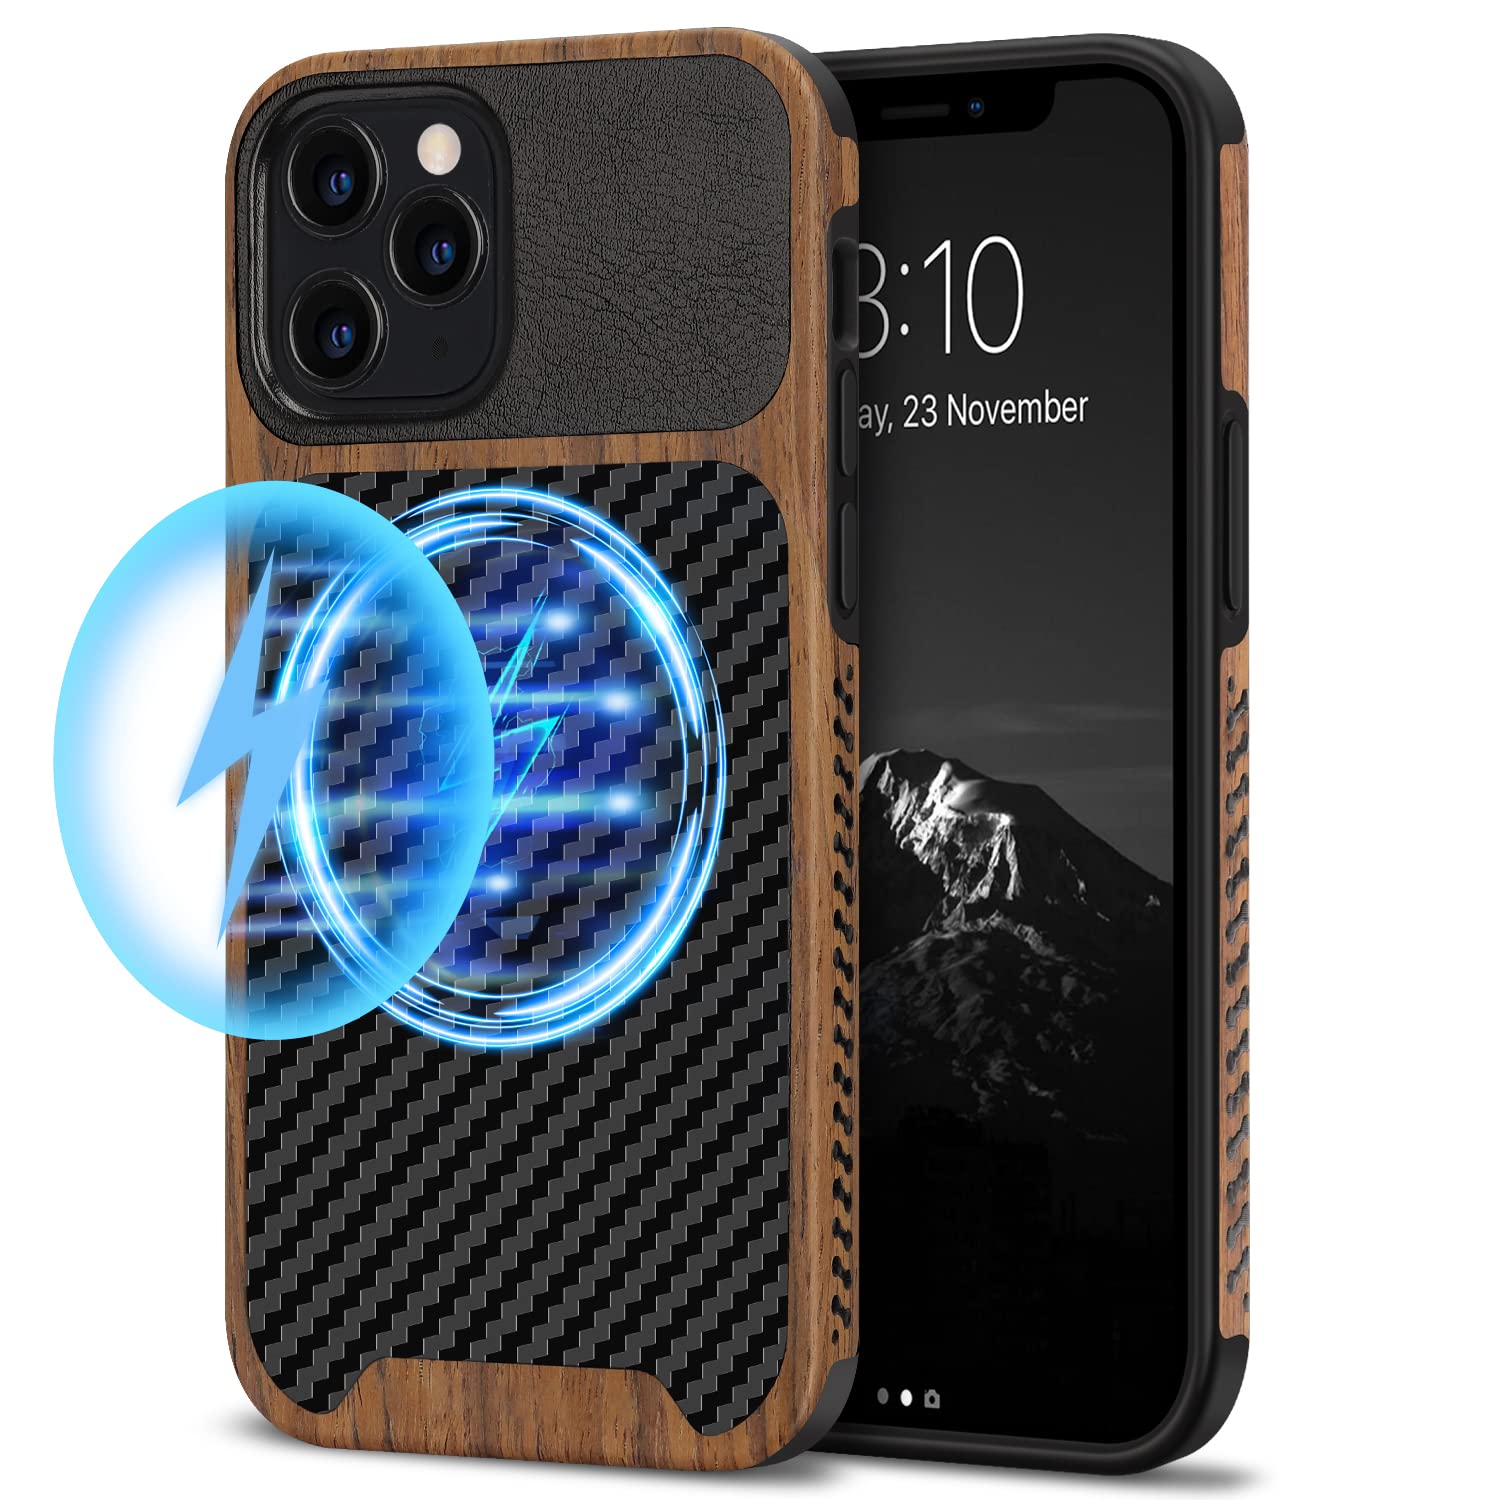 TENDLIN Magnetic Case Compatible with iPhone 12 Pro Case/iPhone 12 Case Wood Grain with Carbon Fiber Texture Design Leather Hybrid Slim Case (Compatible with MagSafe) Black